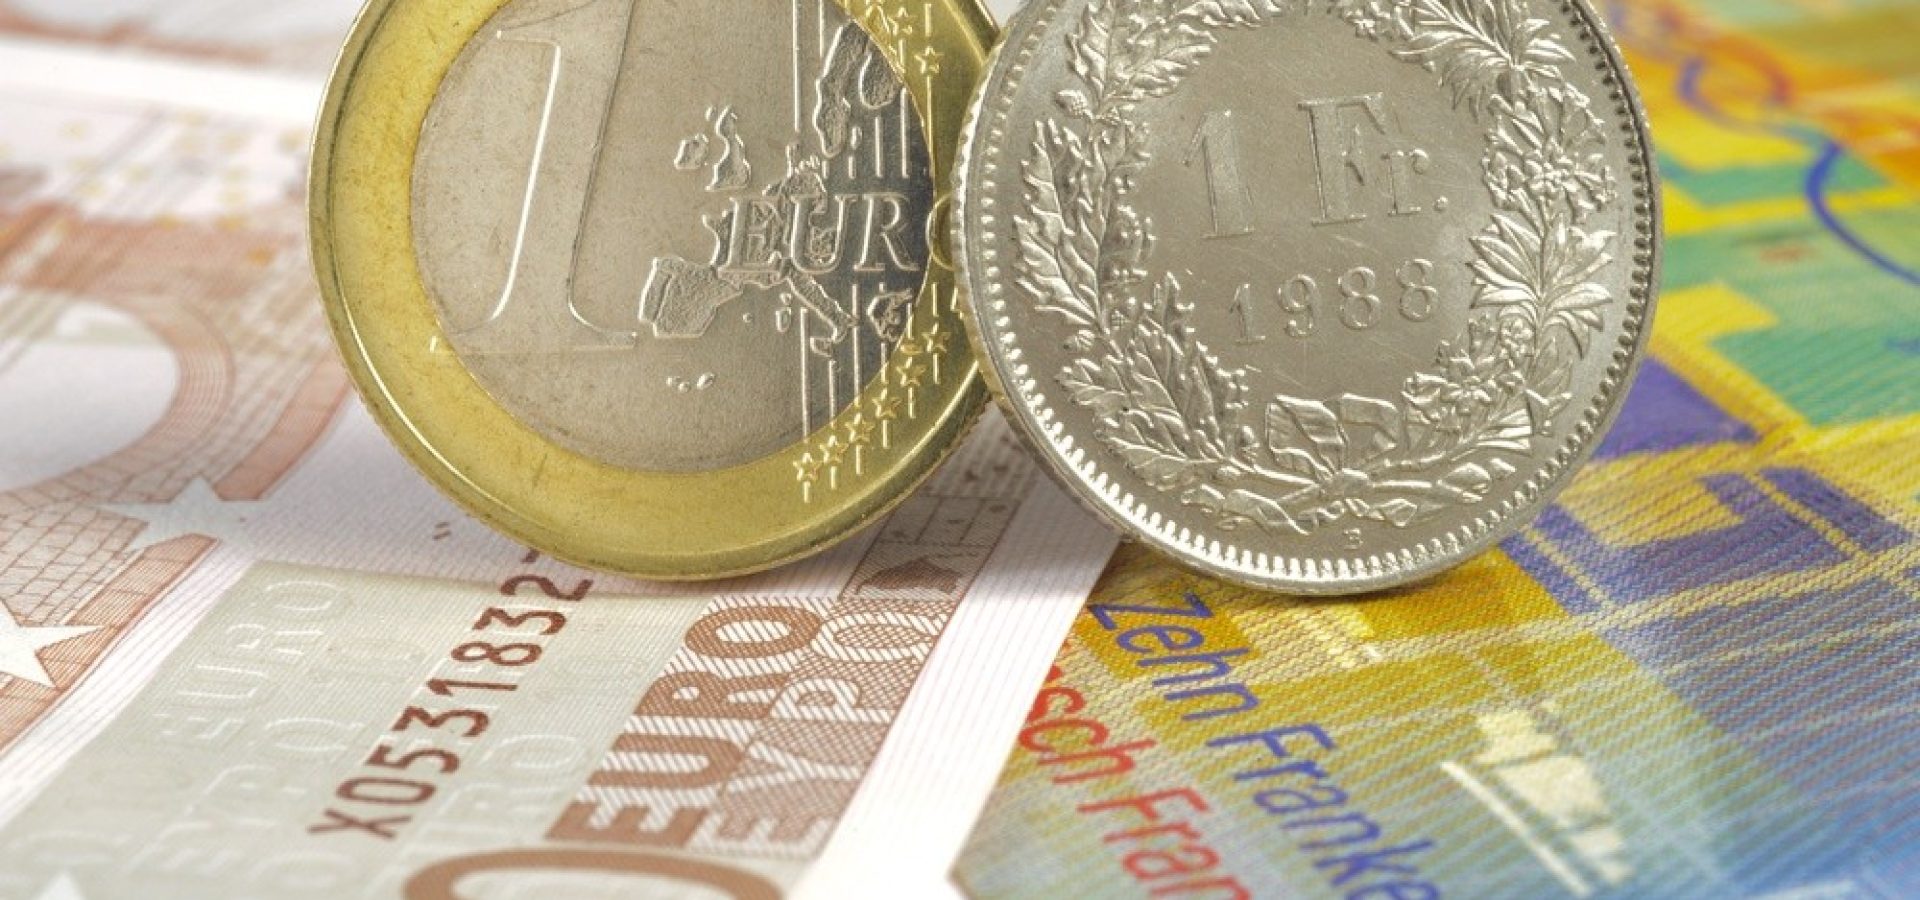 Wibest – Franc: Euro and Swiss franc coins and bills.